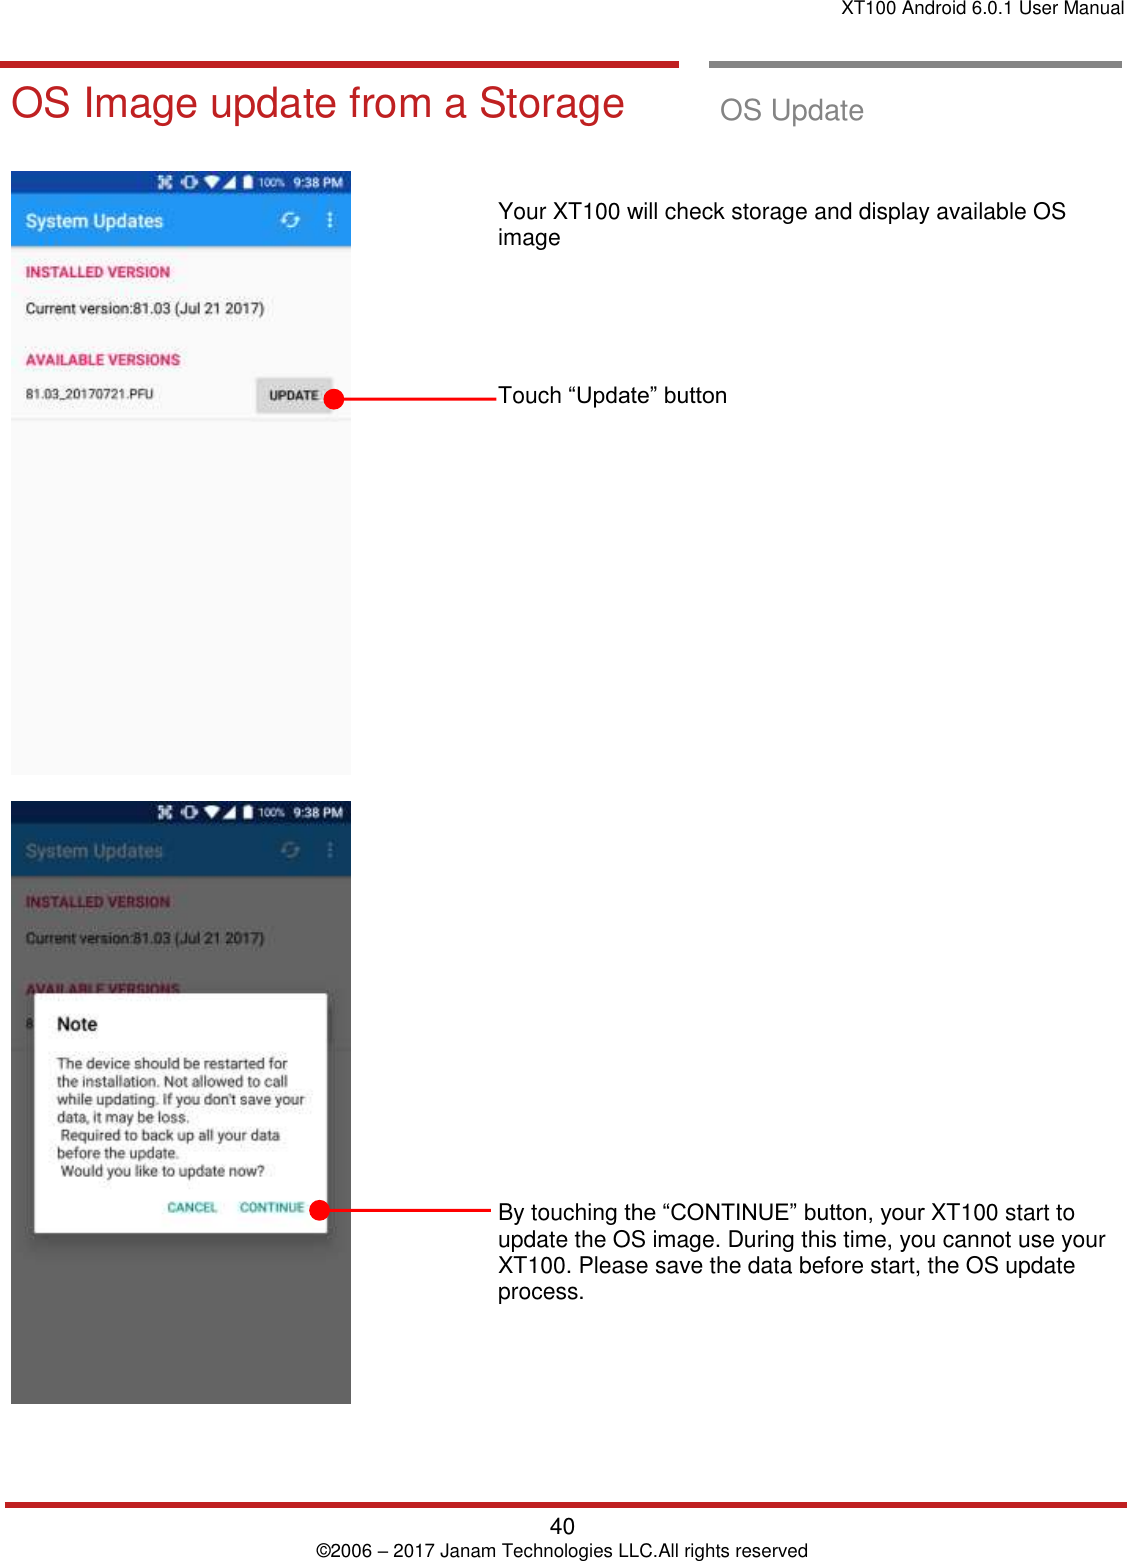 XT100 Android 6.0.1 User Manual   40 © 2006 – 2017 Janam Technologies LLC.All rights reserved  OS Update OS Image update from a Storage  OS Update         Your XT100 will check storage and display available OS image       Touch “Update” button                                By touching the “CONTINUE” button, your XT100 start to update the OS image. During this time, you cannot use your XT100. Please save the data before start, the OS update process.  